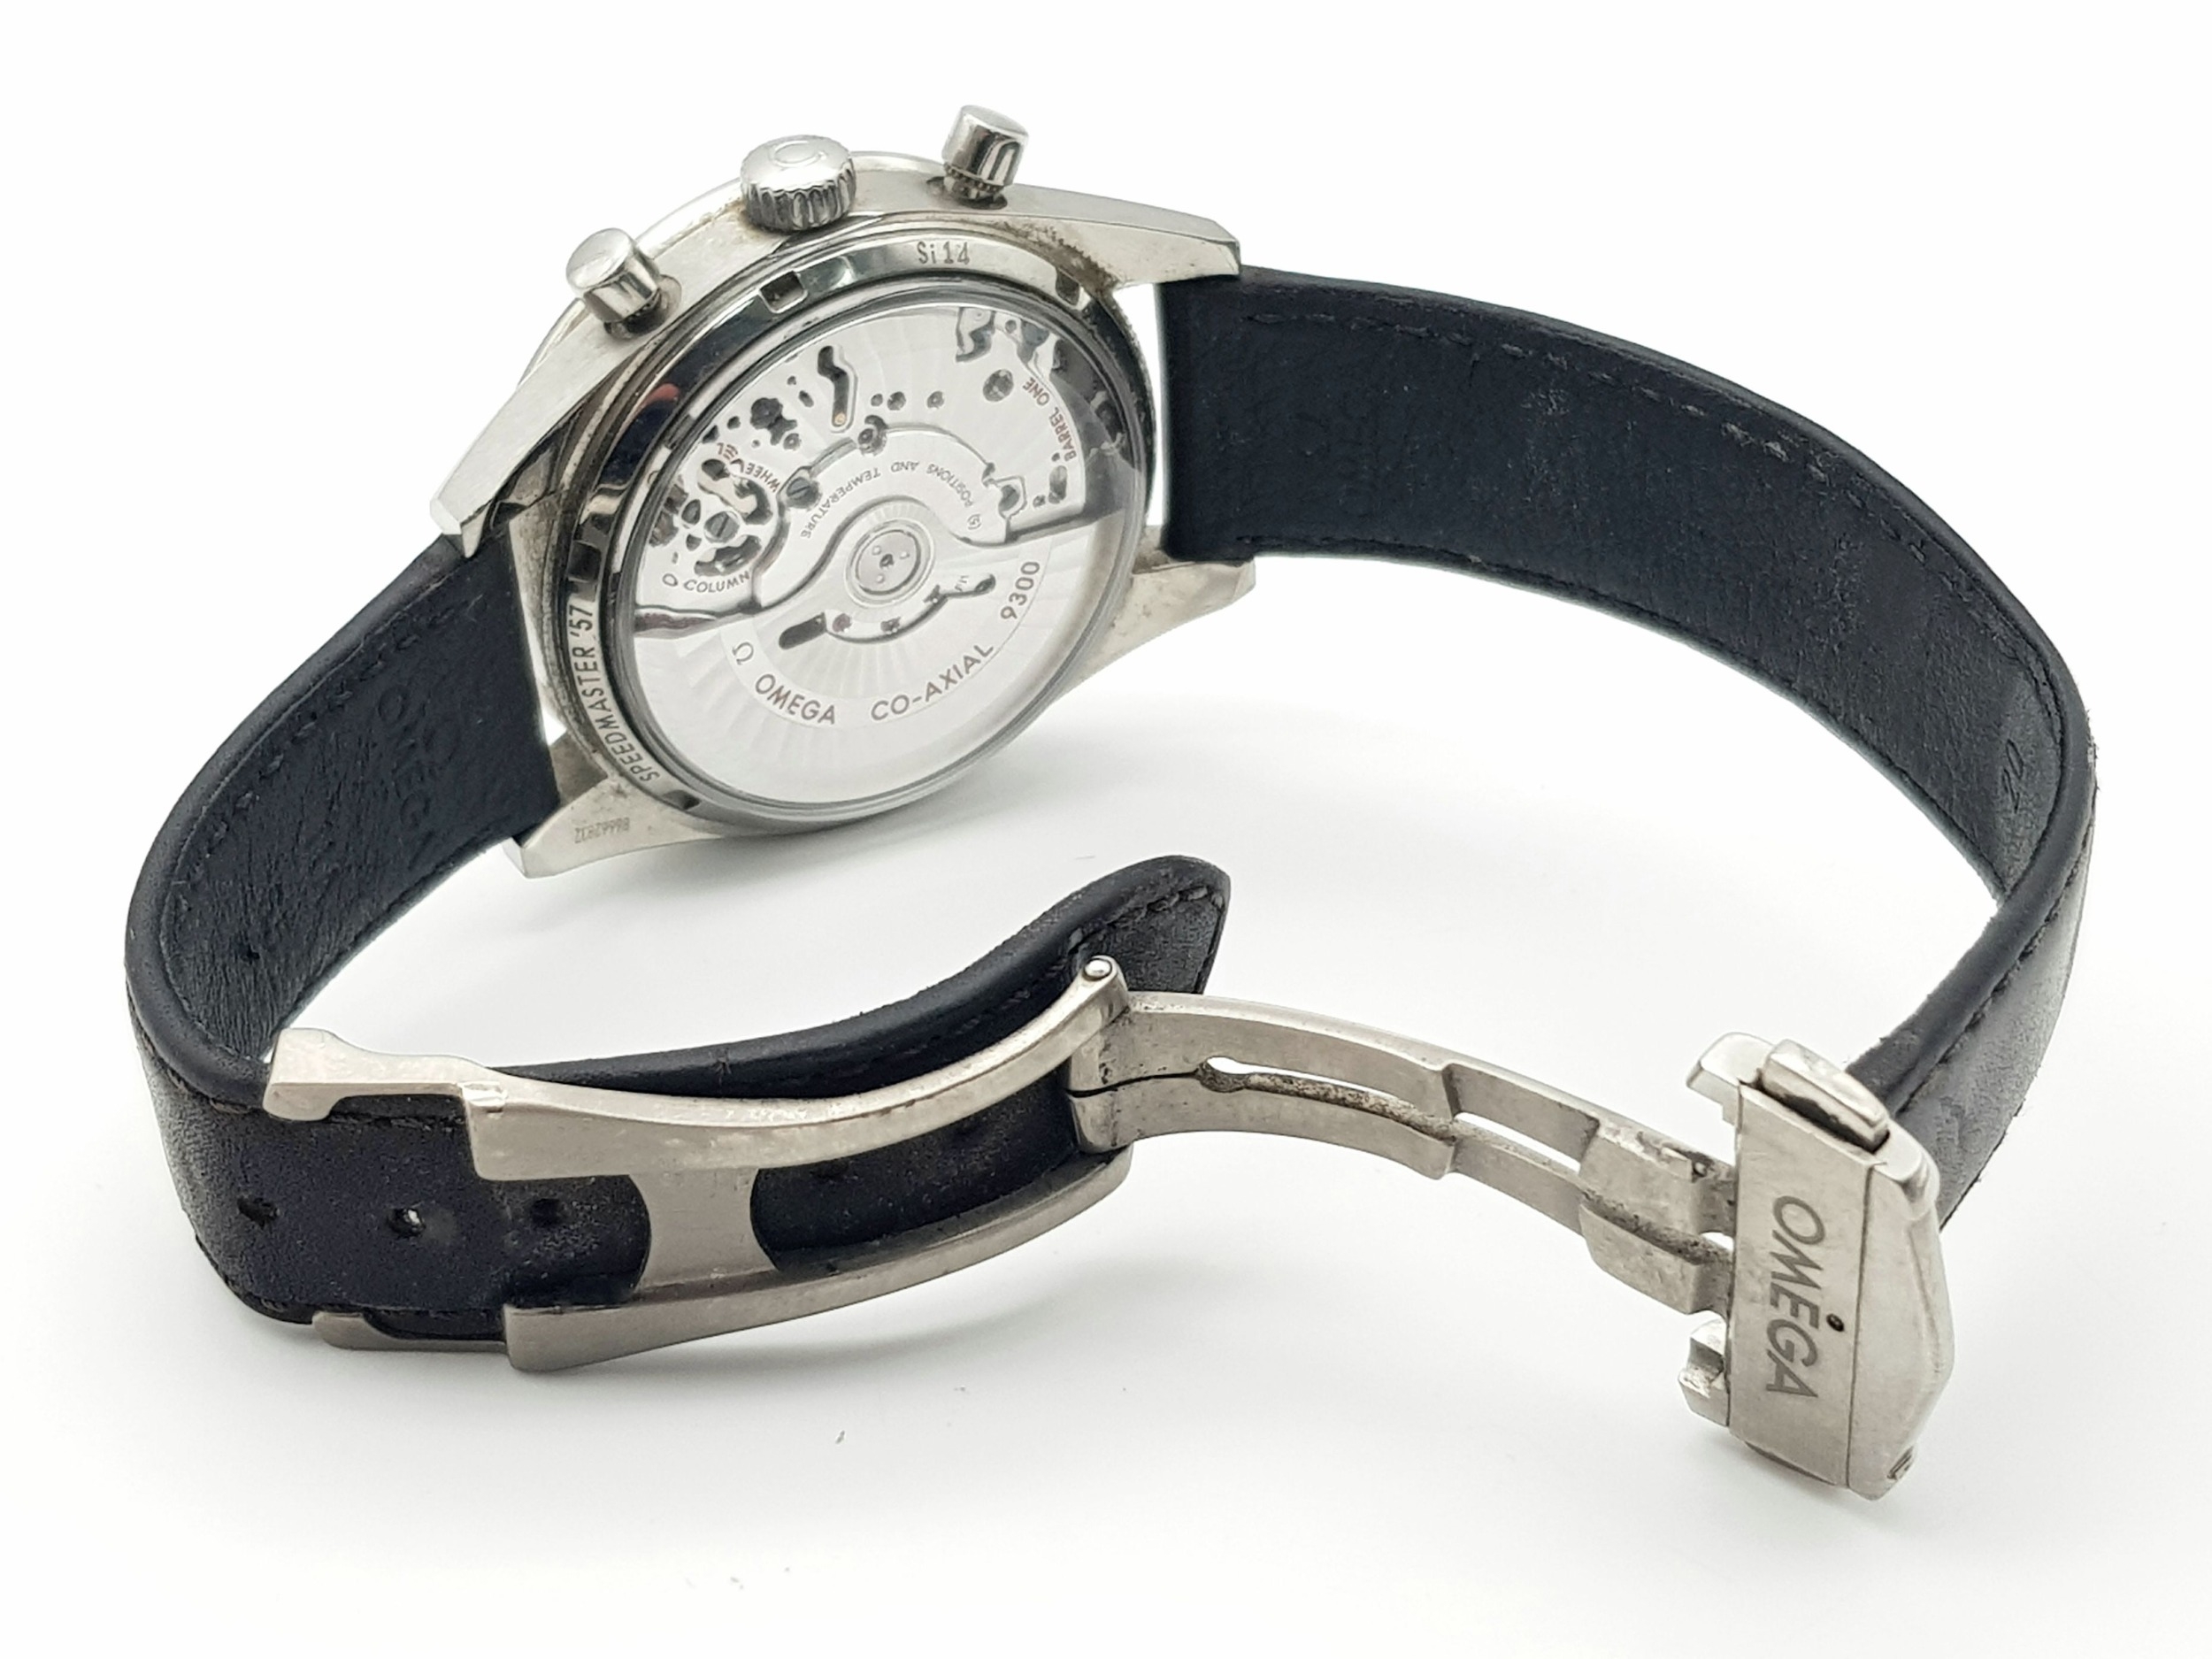 An Omega Speedmaster Automatic Co-Axial Chronograph Gents Watch. Black leather tag strap. - Image 5 of 7